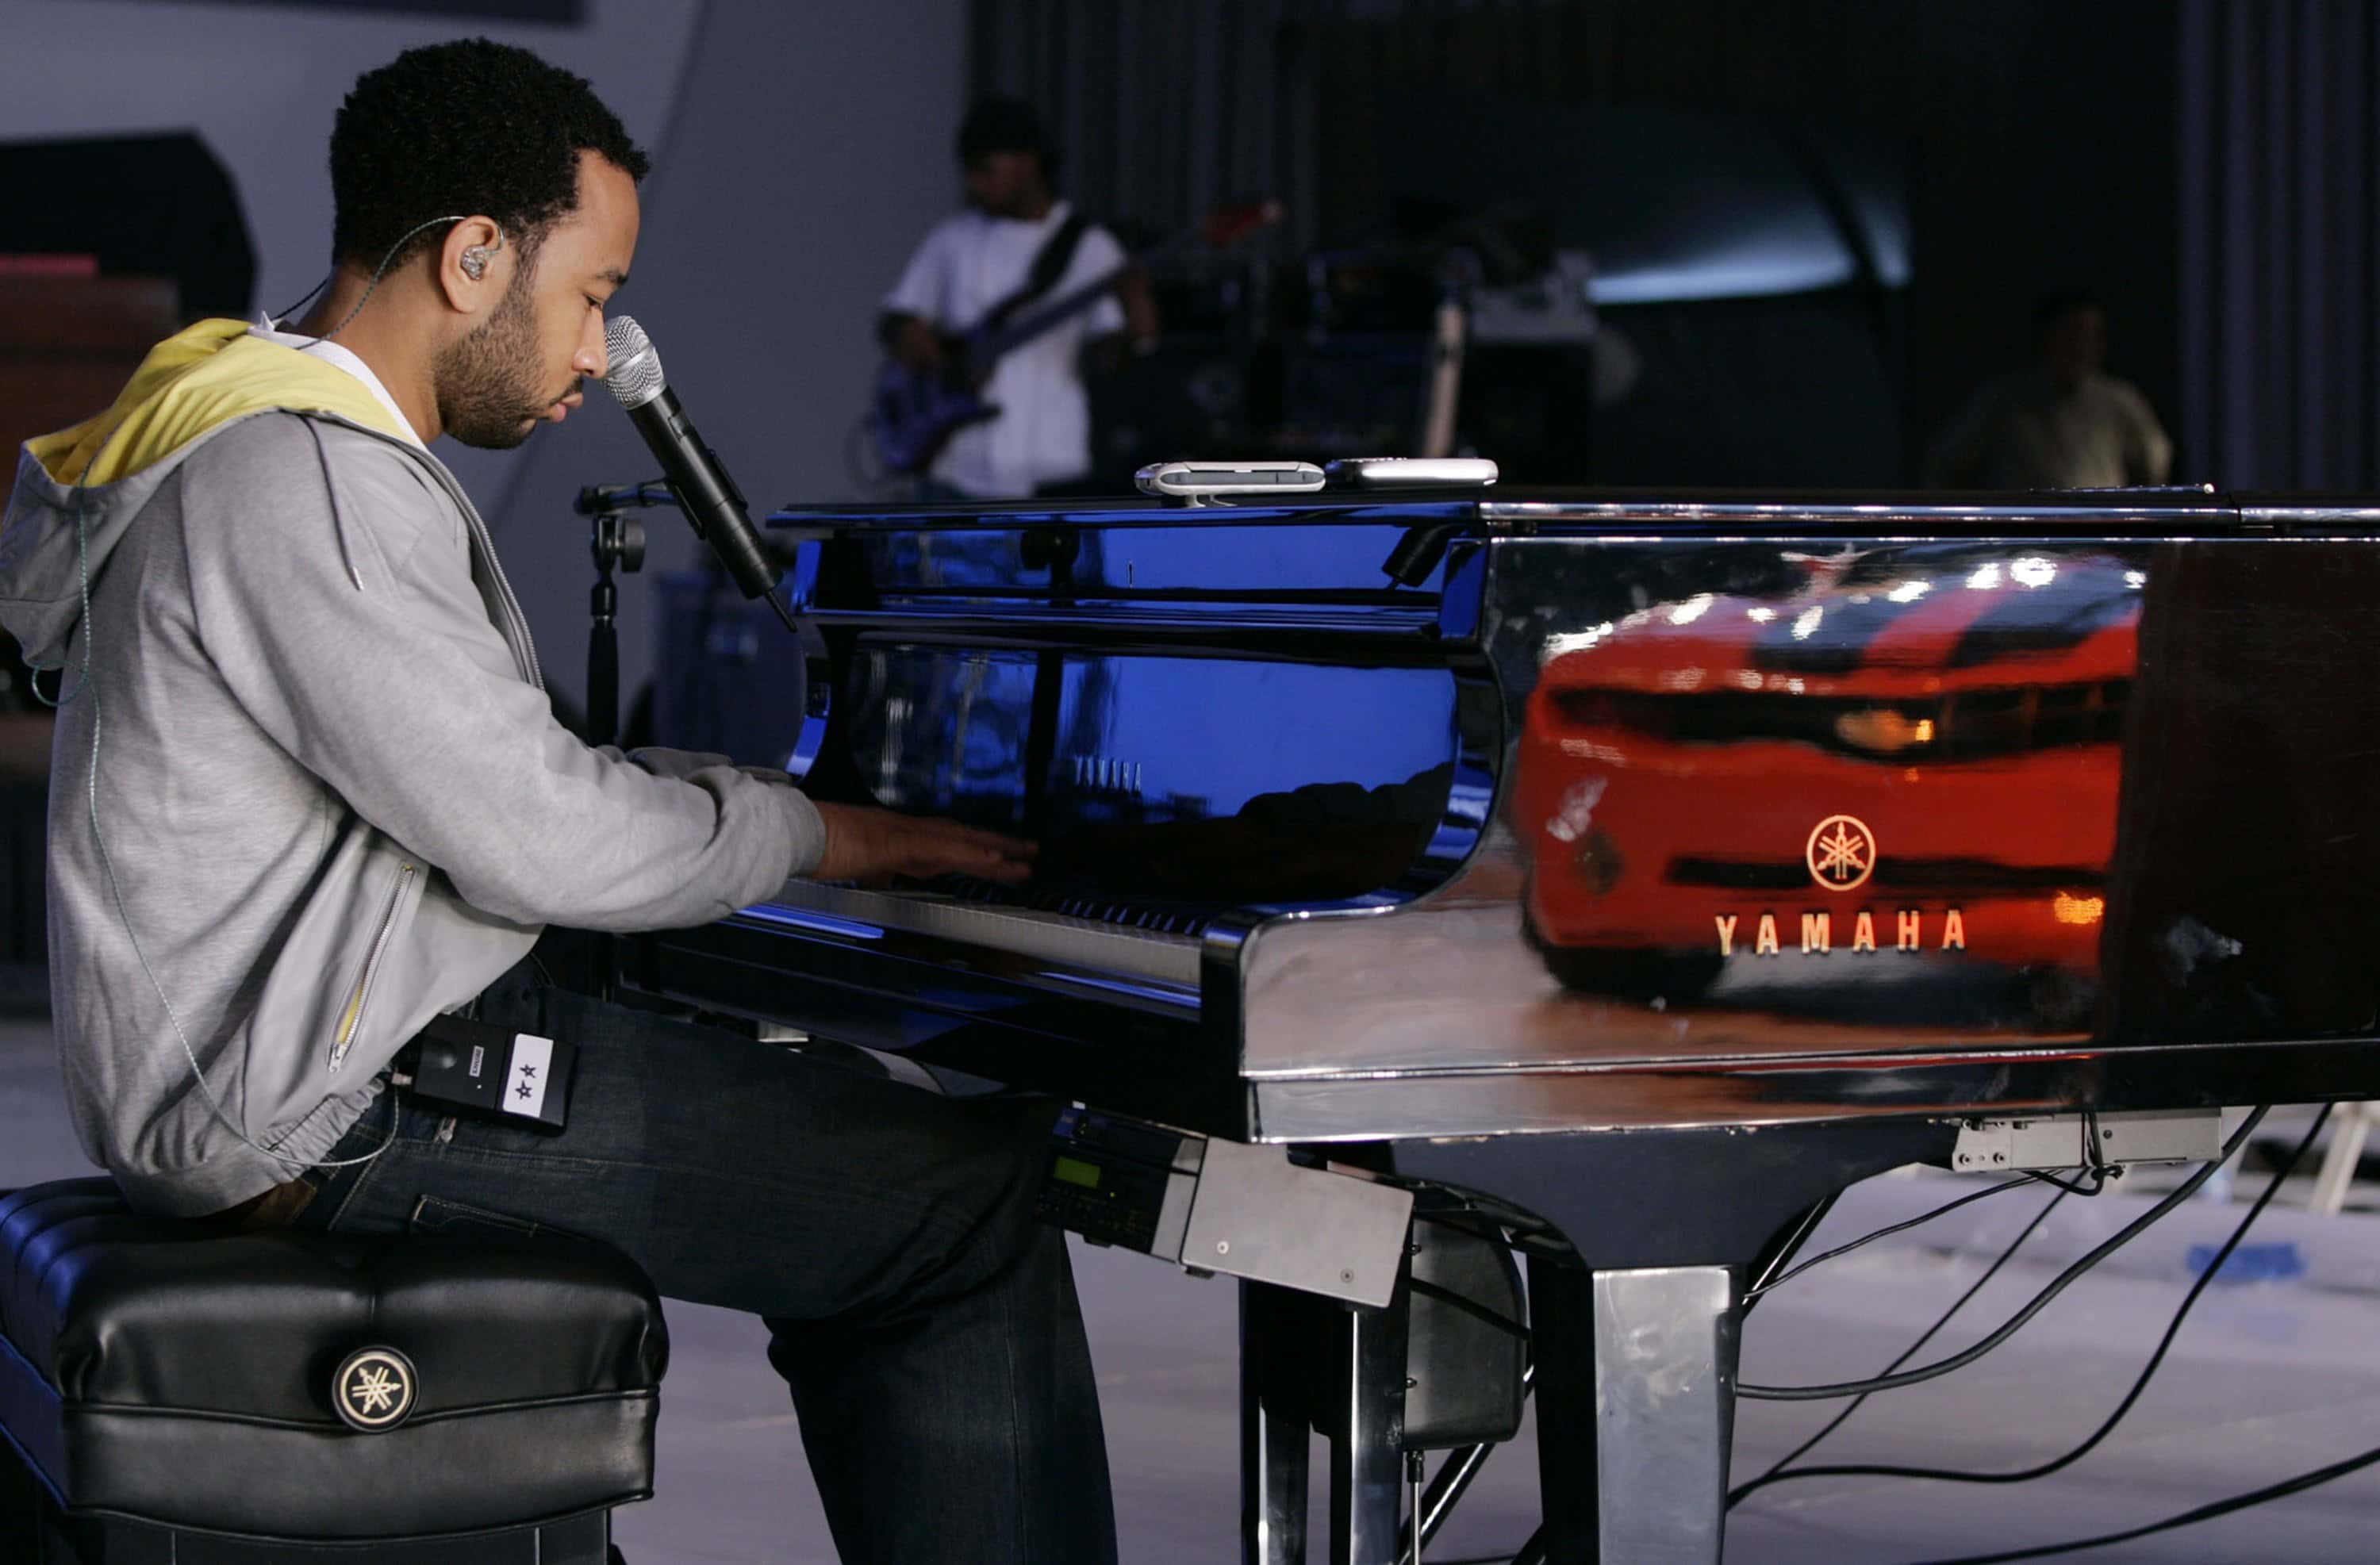 Latest Cars Are Showcased At The Detroit Auto Show. John Legend.